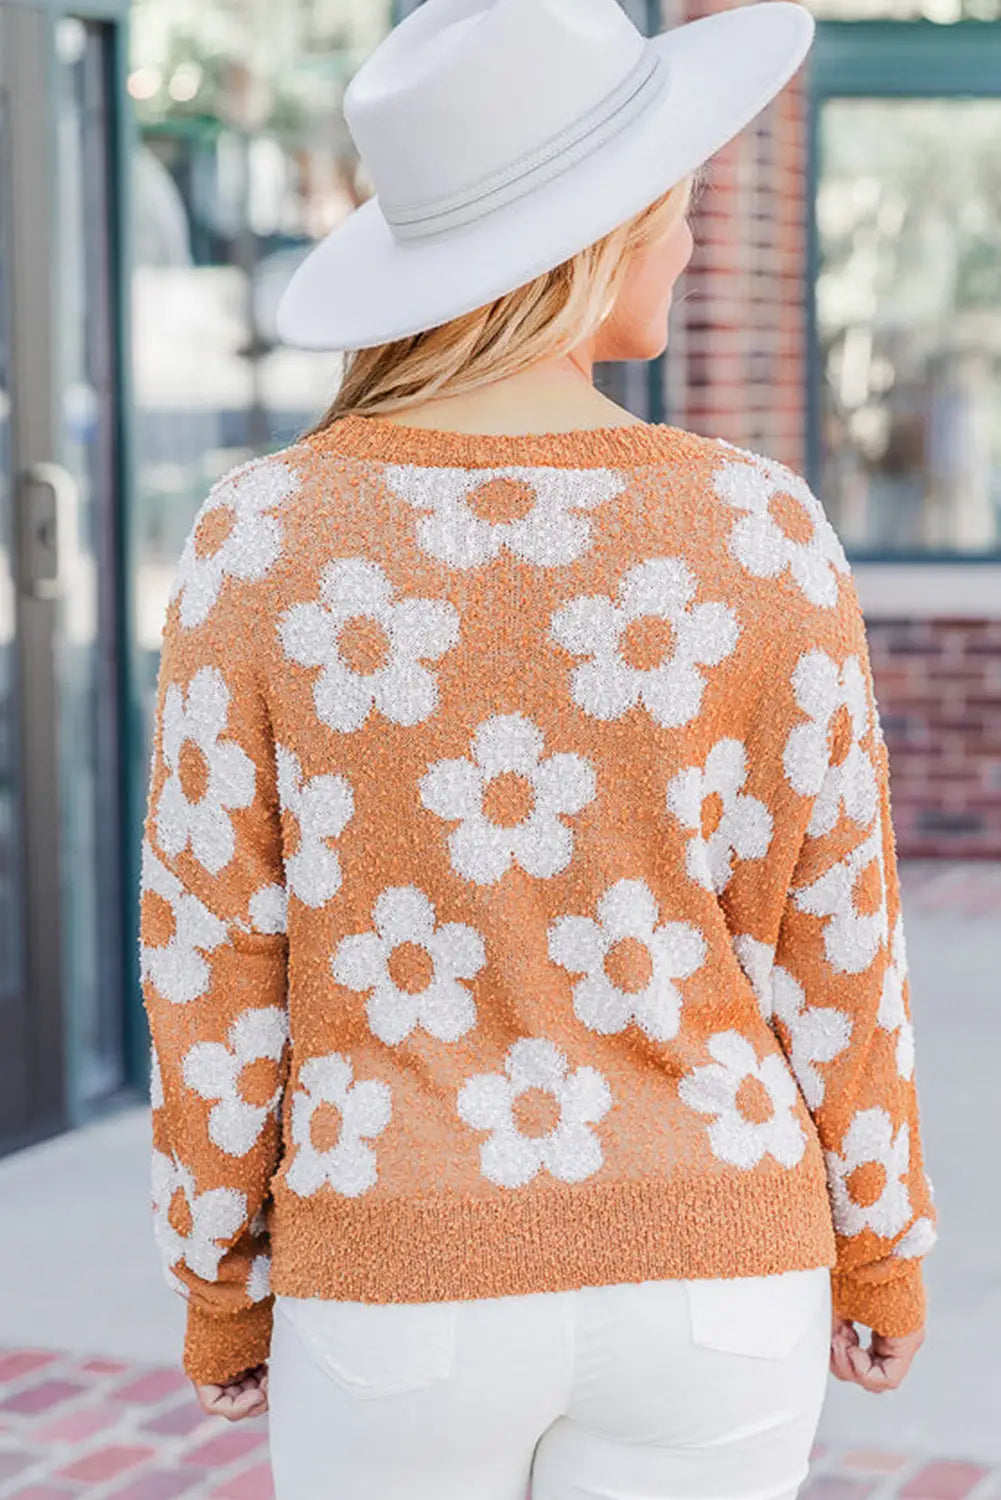 Grapefruit orange fuzzy floral knitted drop shoulder sweater - sweaters & cardigans